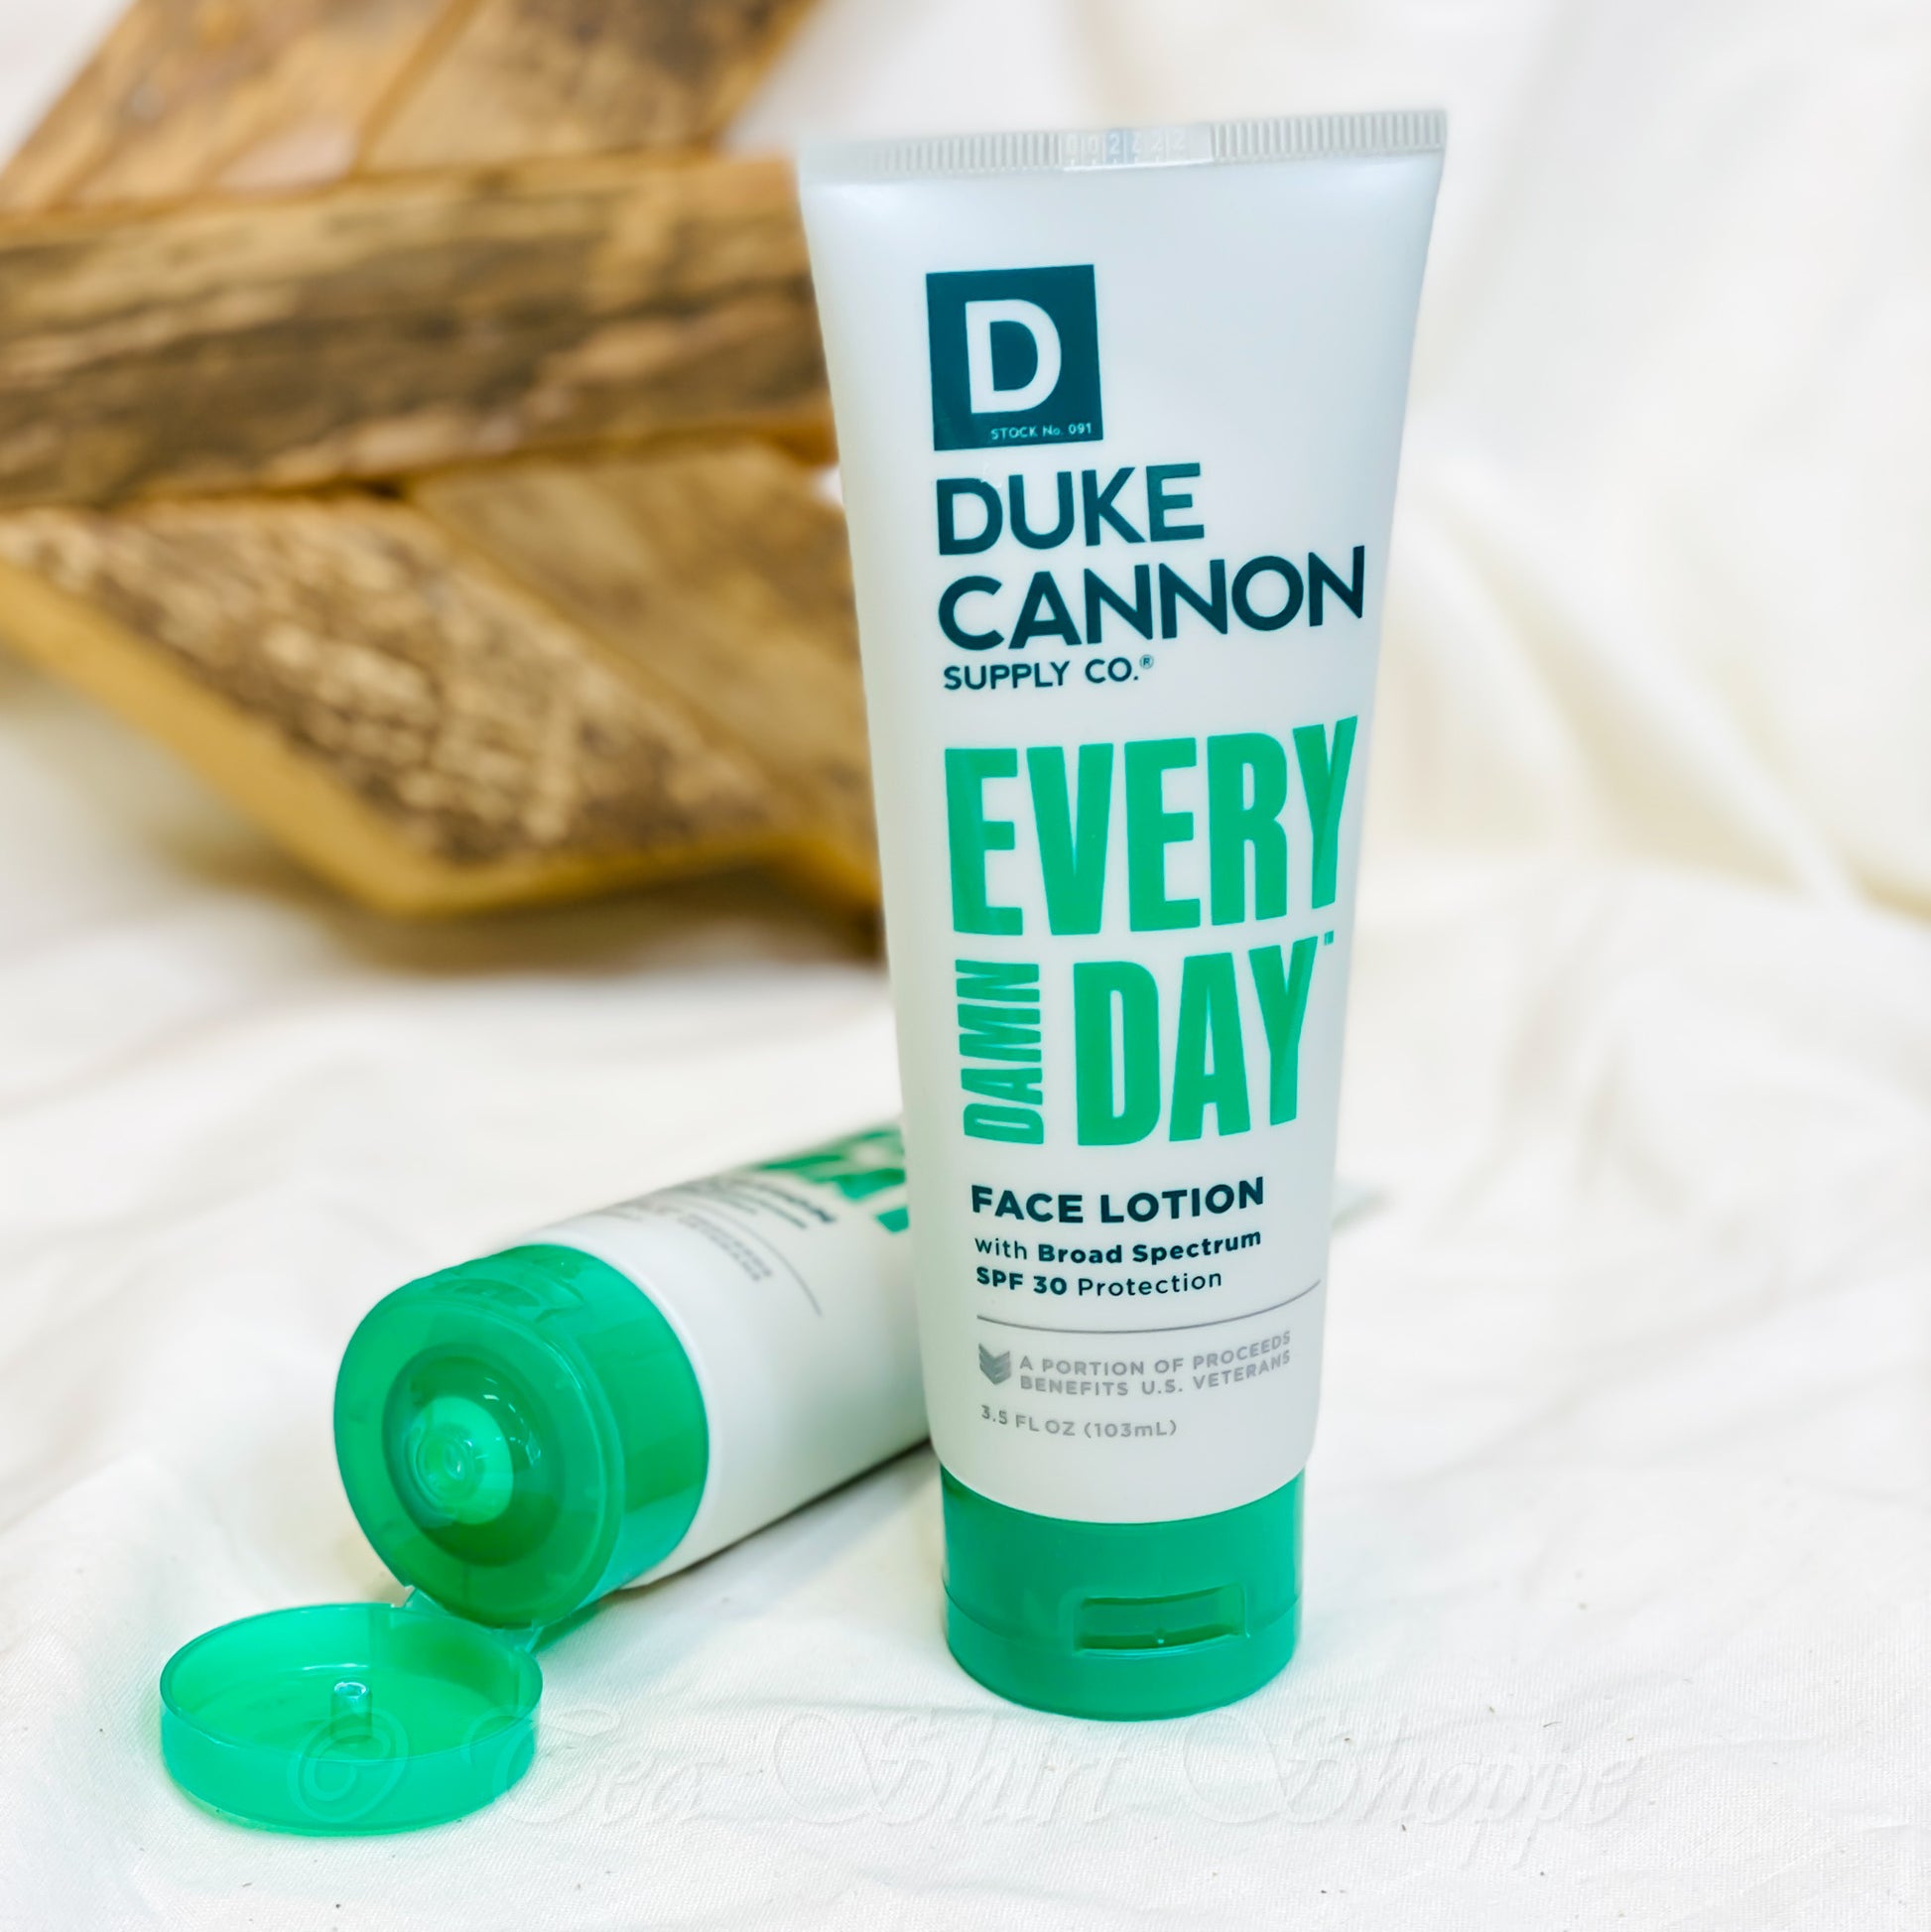 Every damn day, people look at your face. So it’s best to take care of it, every damn day. Duke Cannon’s Standard Issue 2-in-1 SPF Face Lotion helps you increase your face value for the present and future. Short term, it provides superior hydration and reduces excess oil and shine. 